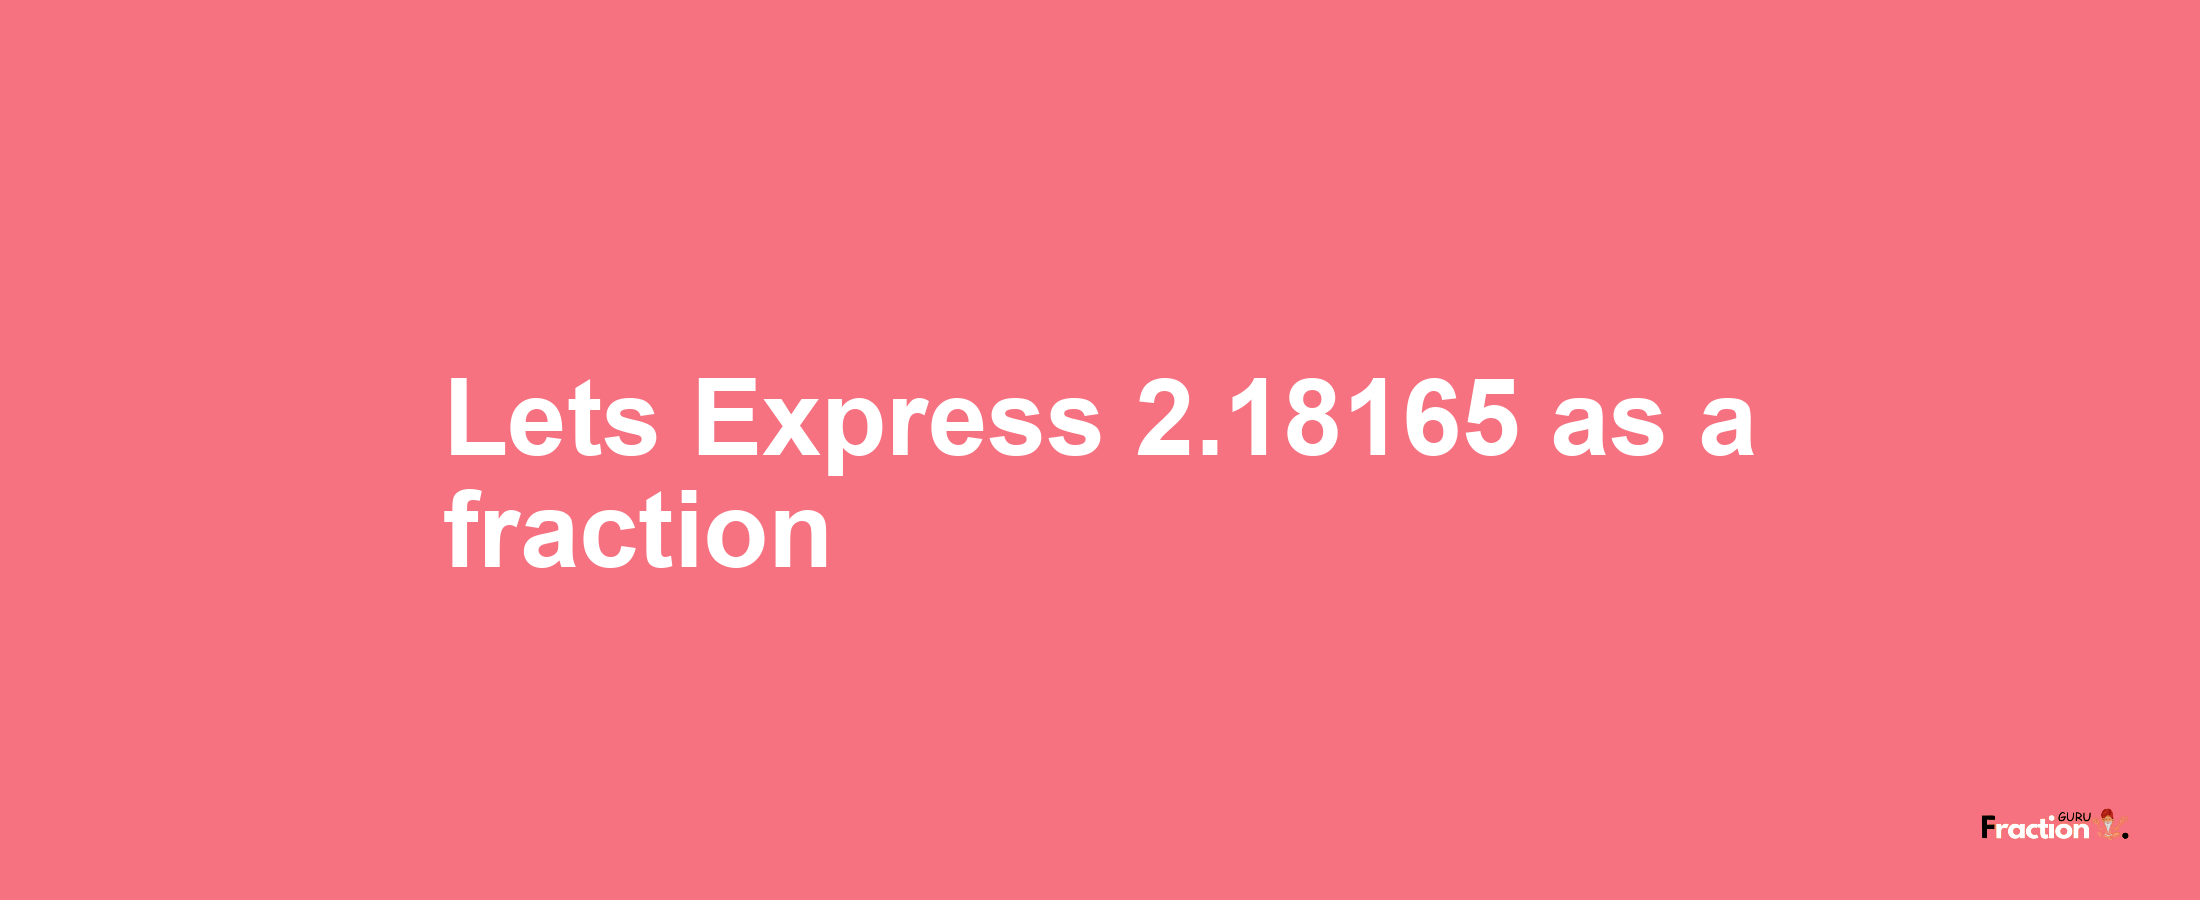 Lets Express 2.18165 as afraction